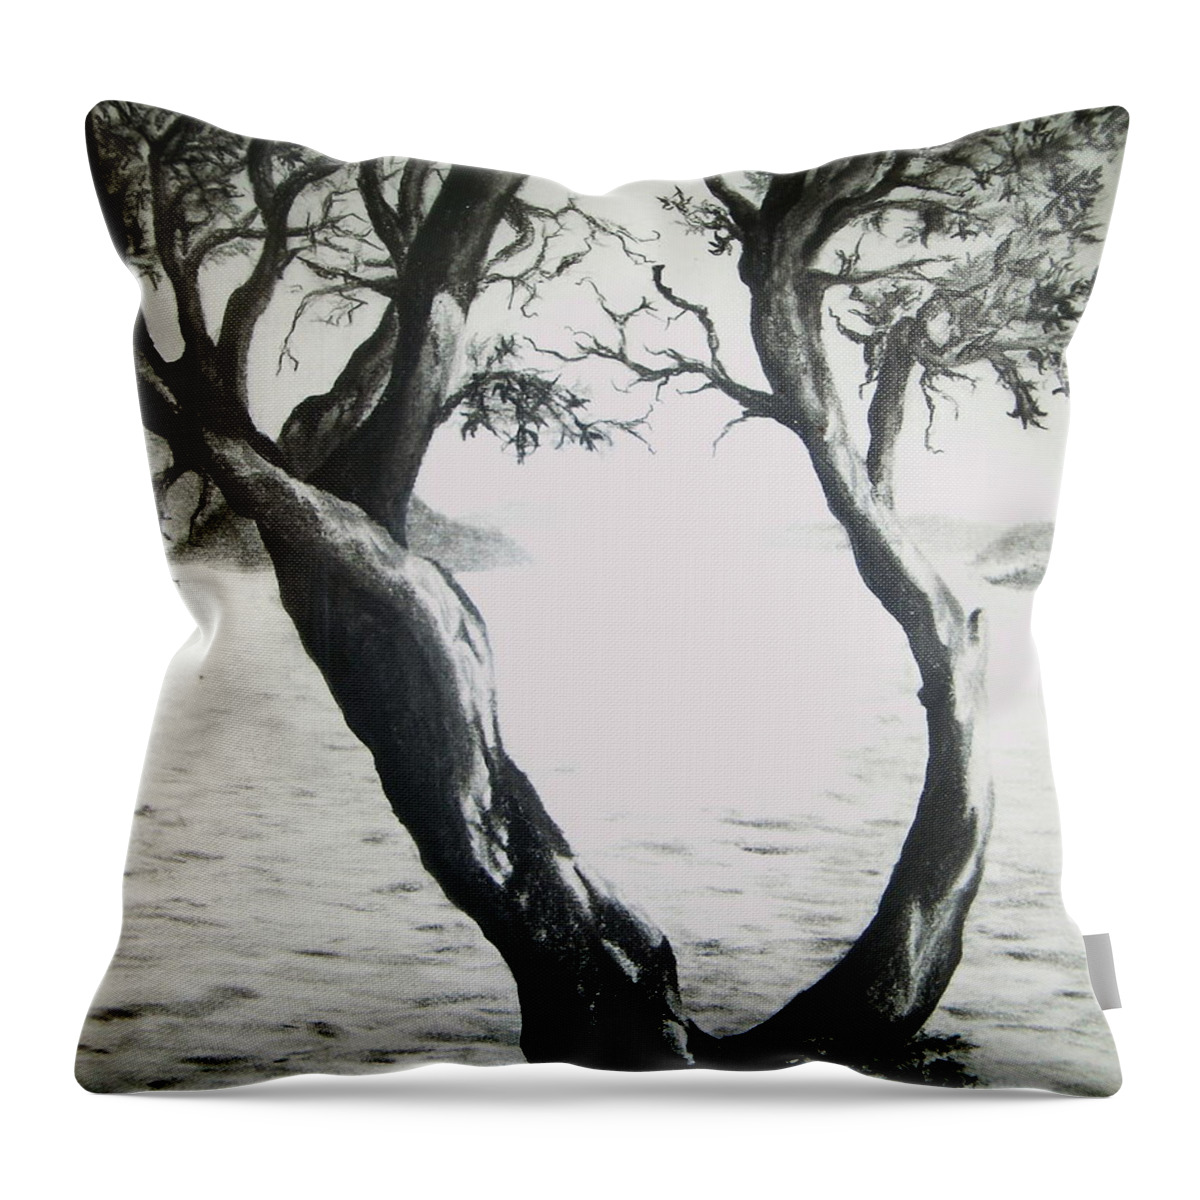 Nature Throw Pillow featuring the drawing Indralaya Madrona by Leizel Grant